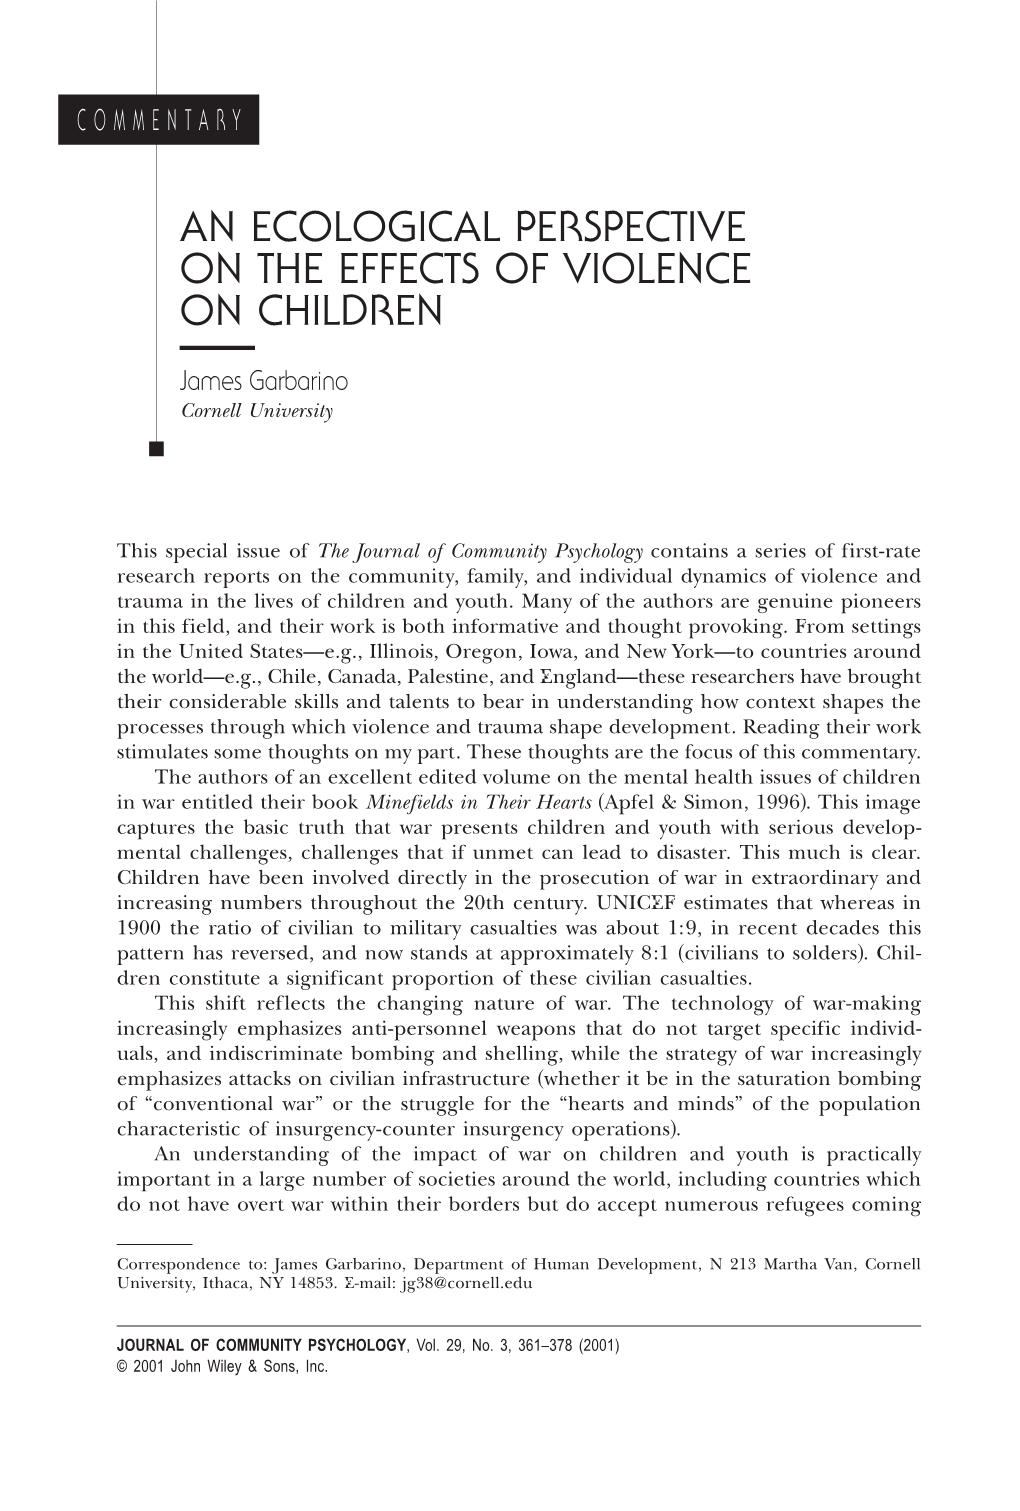 An Ecological Perspective on the Effects of Violence on Children